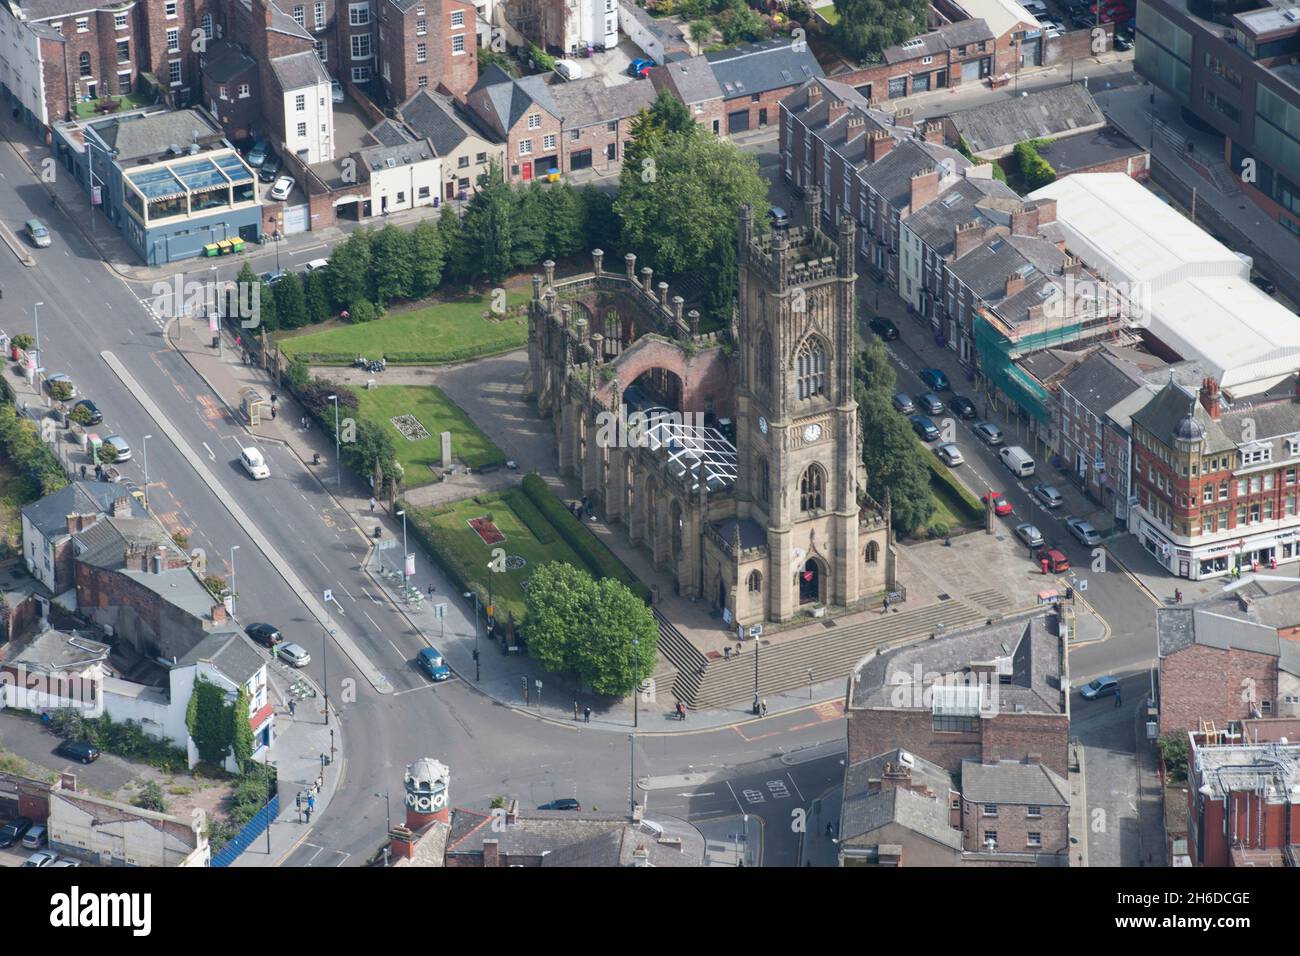 The Church of St Luke, a ruined Anglican parish church, badly damaged during the Liverpool Blitz on 6th May 1941, is commonly known as the Bombed out Church and is regarded as a war memorial, Liverpool, 2015. Stock Photo